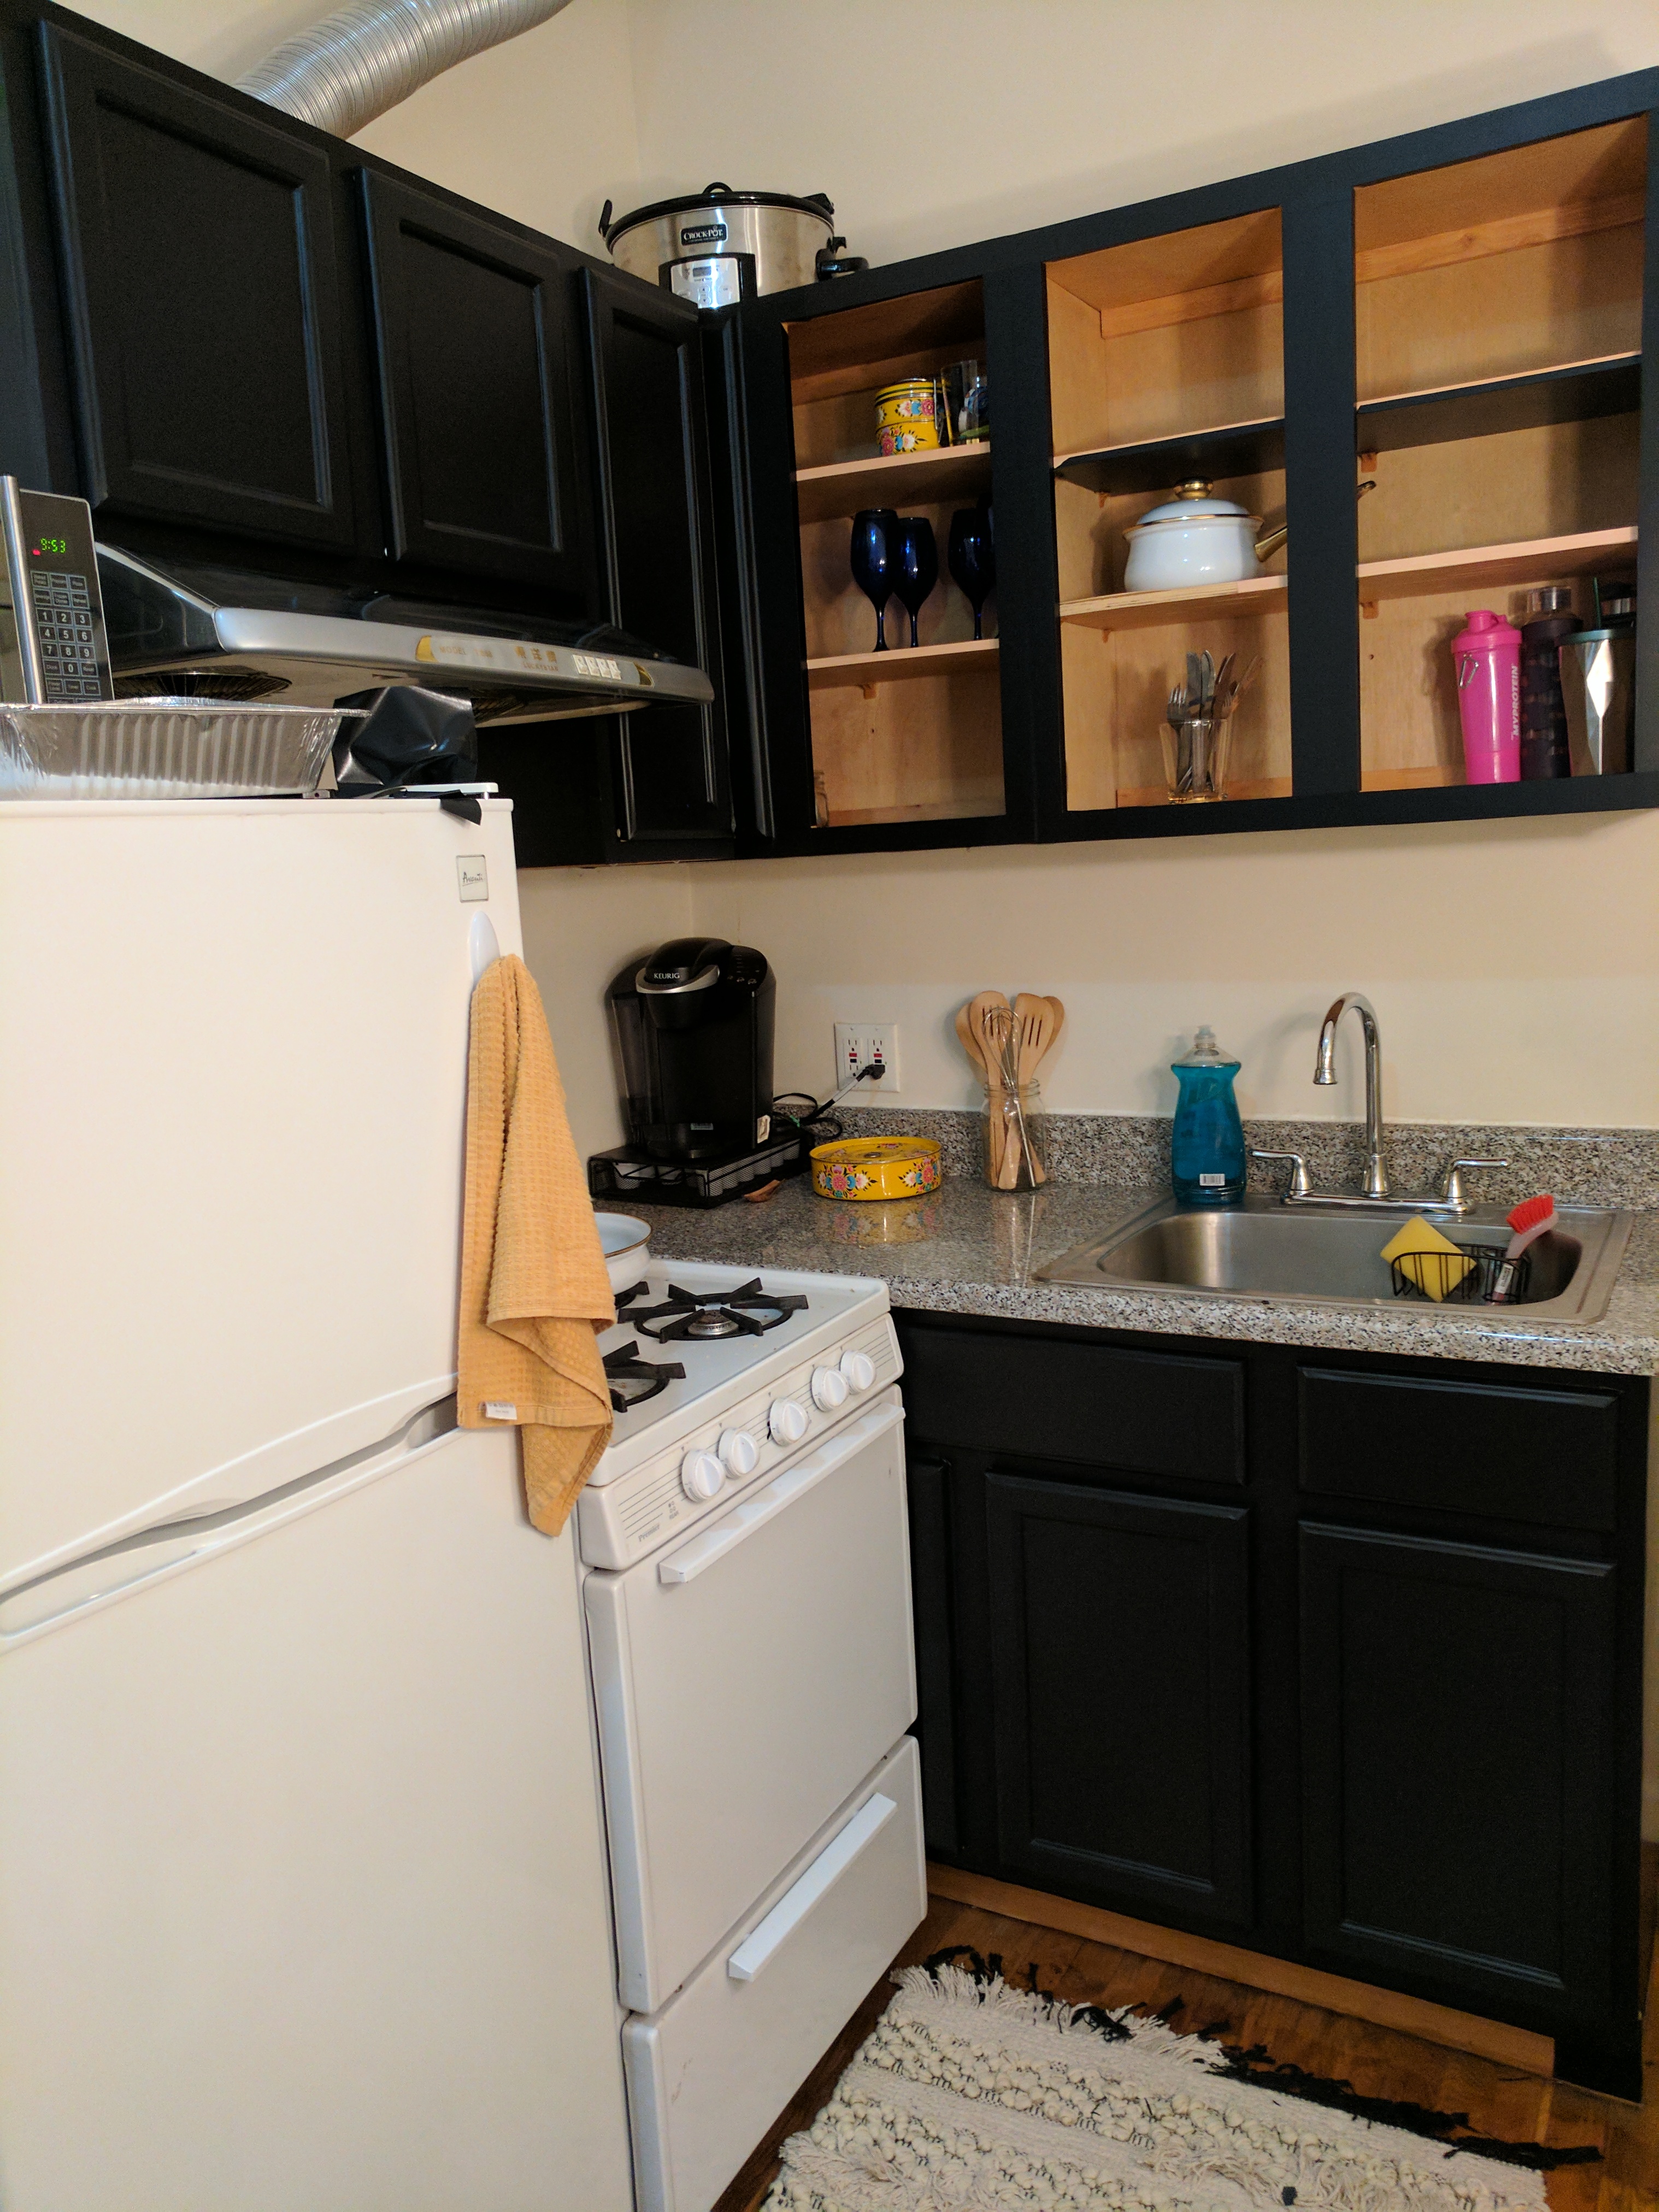 Diy Contact Paper Kitchen Update Part 1, Does Contact Paper Ruin Cabinets